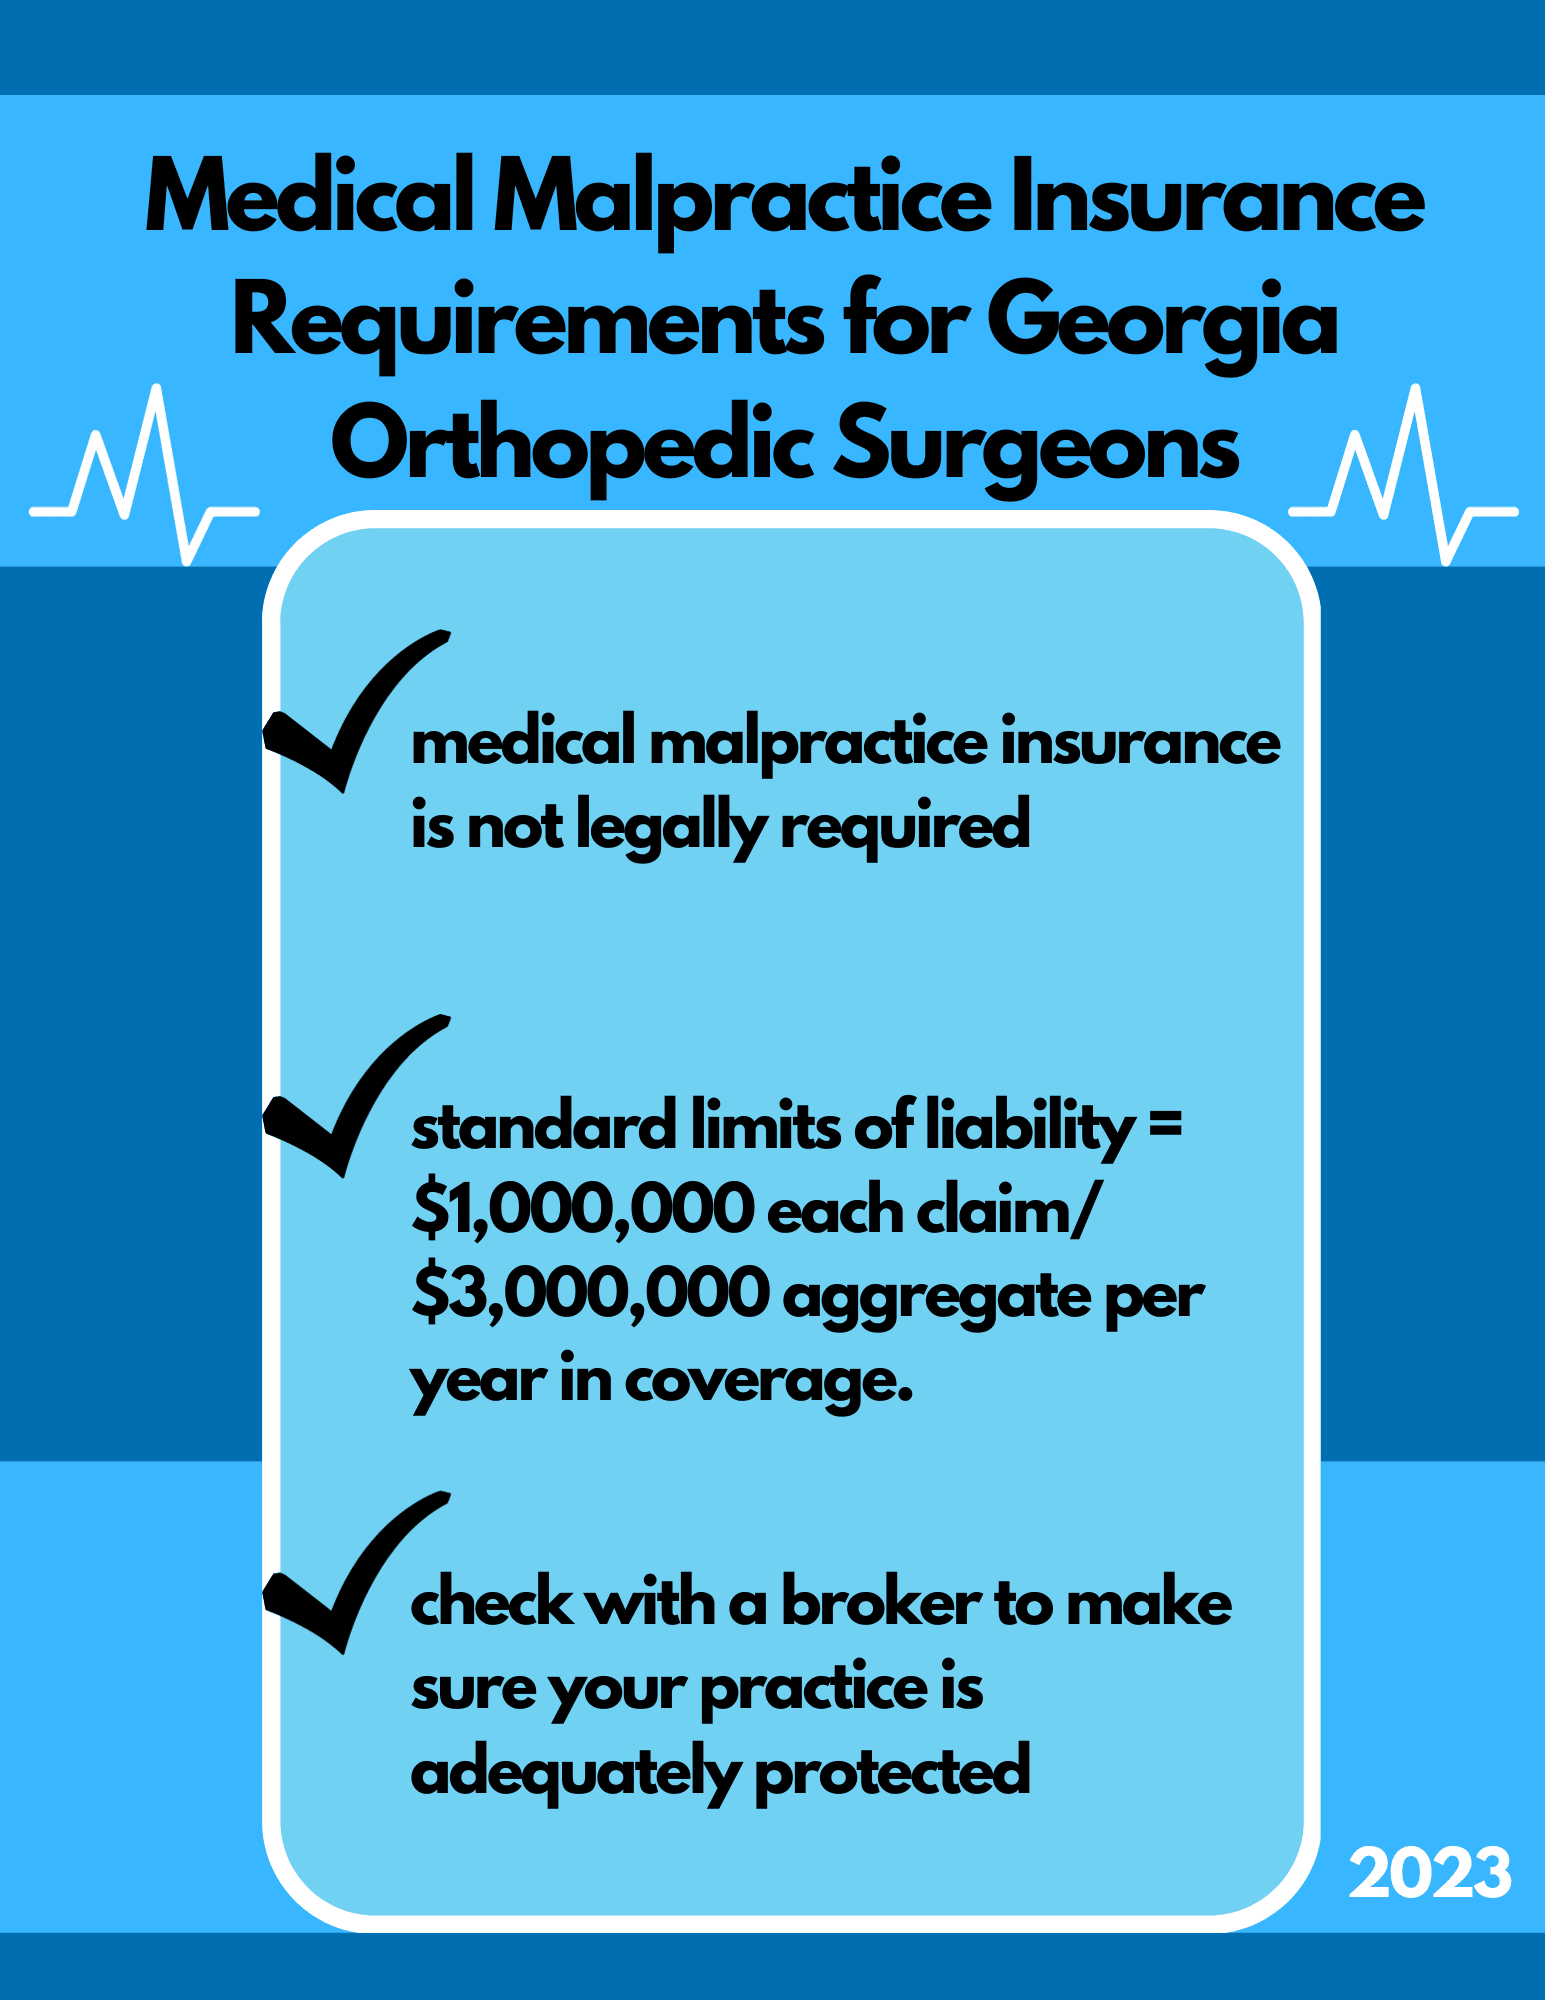 GA medical malpractice requirements for Ortho Surgeons